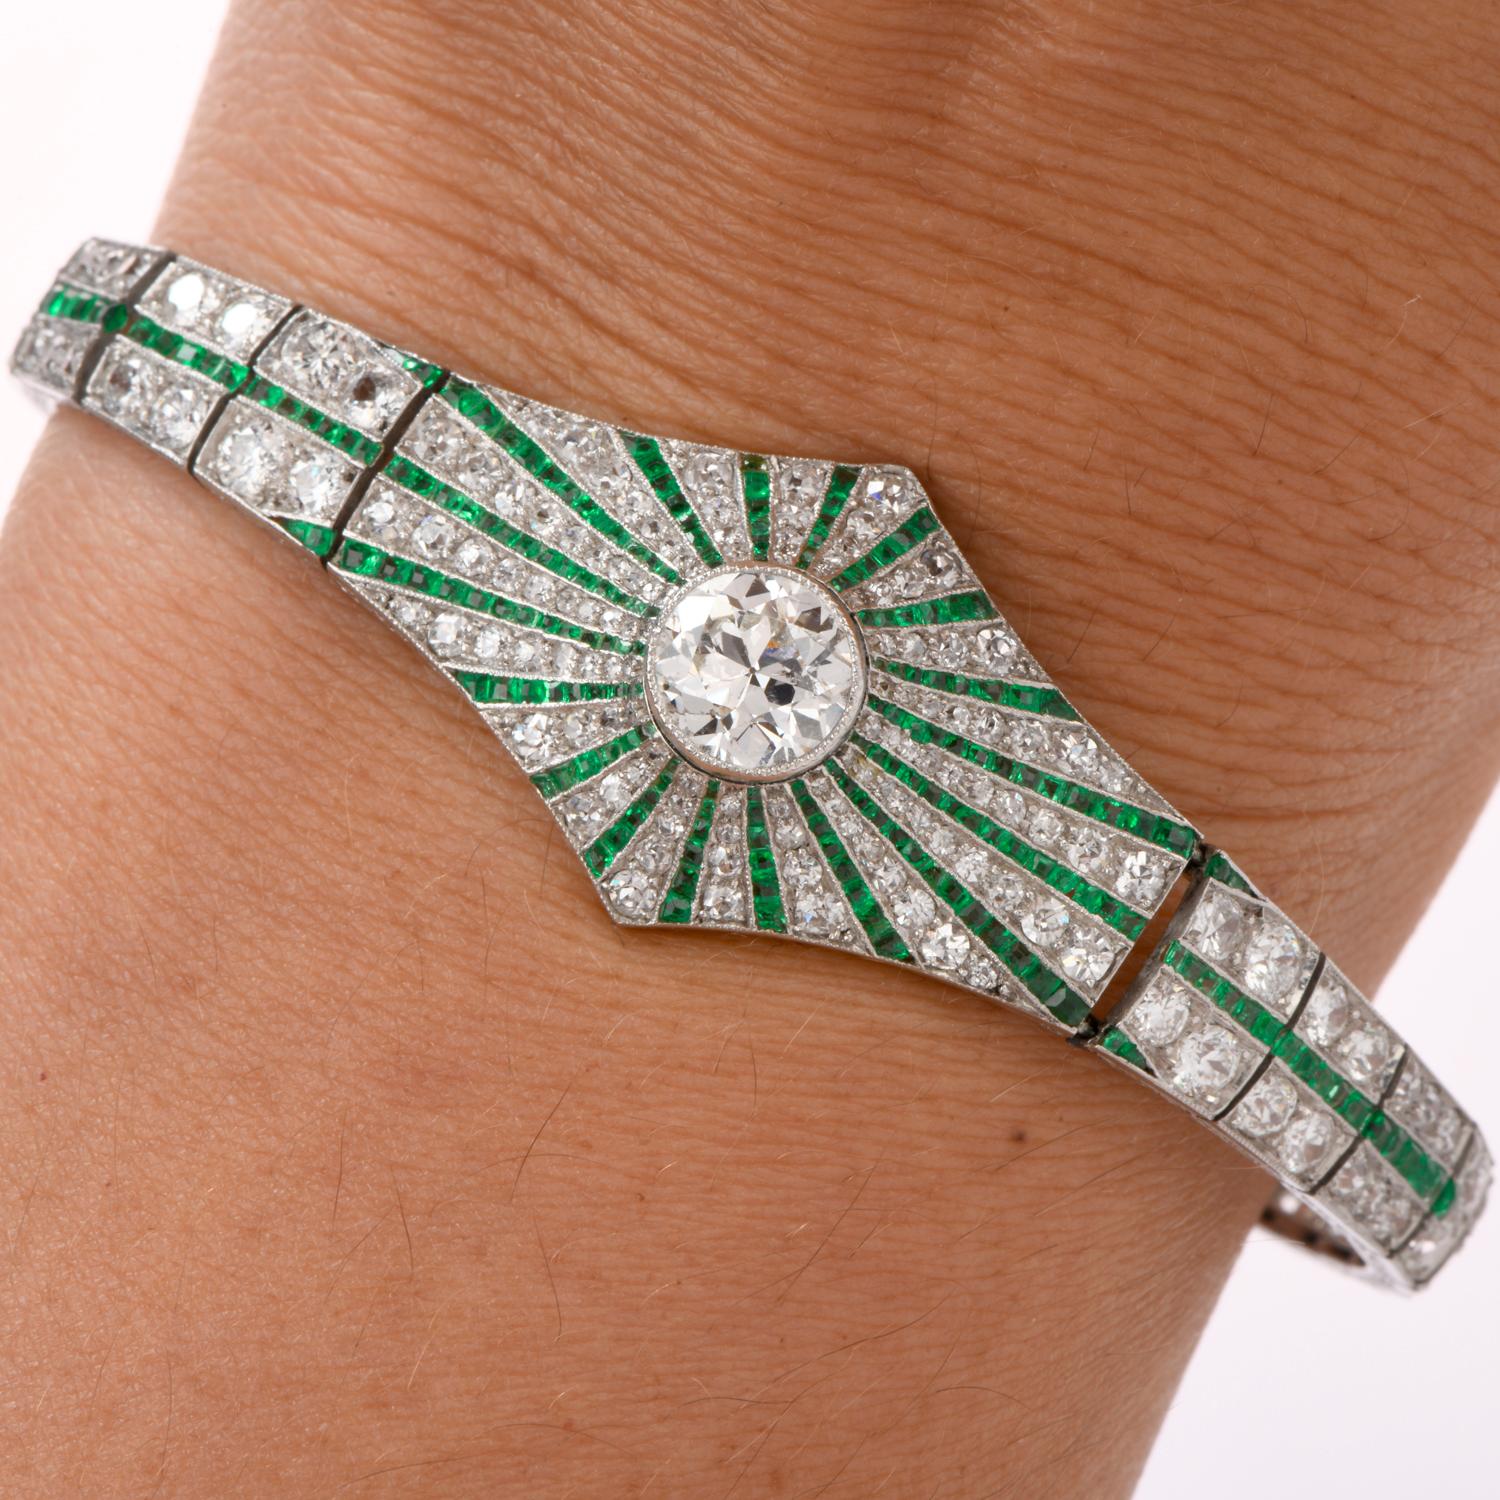 This antique pattern of lines, or rays radiating from the centrally

positioned Diamond are an absract starburst effect

visualized by the maker of this exceptional, vintage Art Deco Bracelet.

The center of light in this antique art deco bracelet